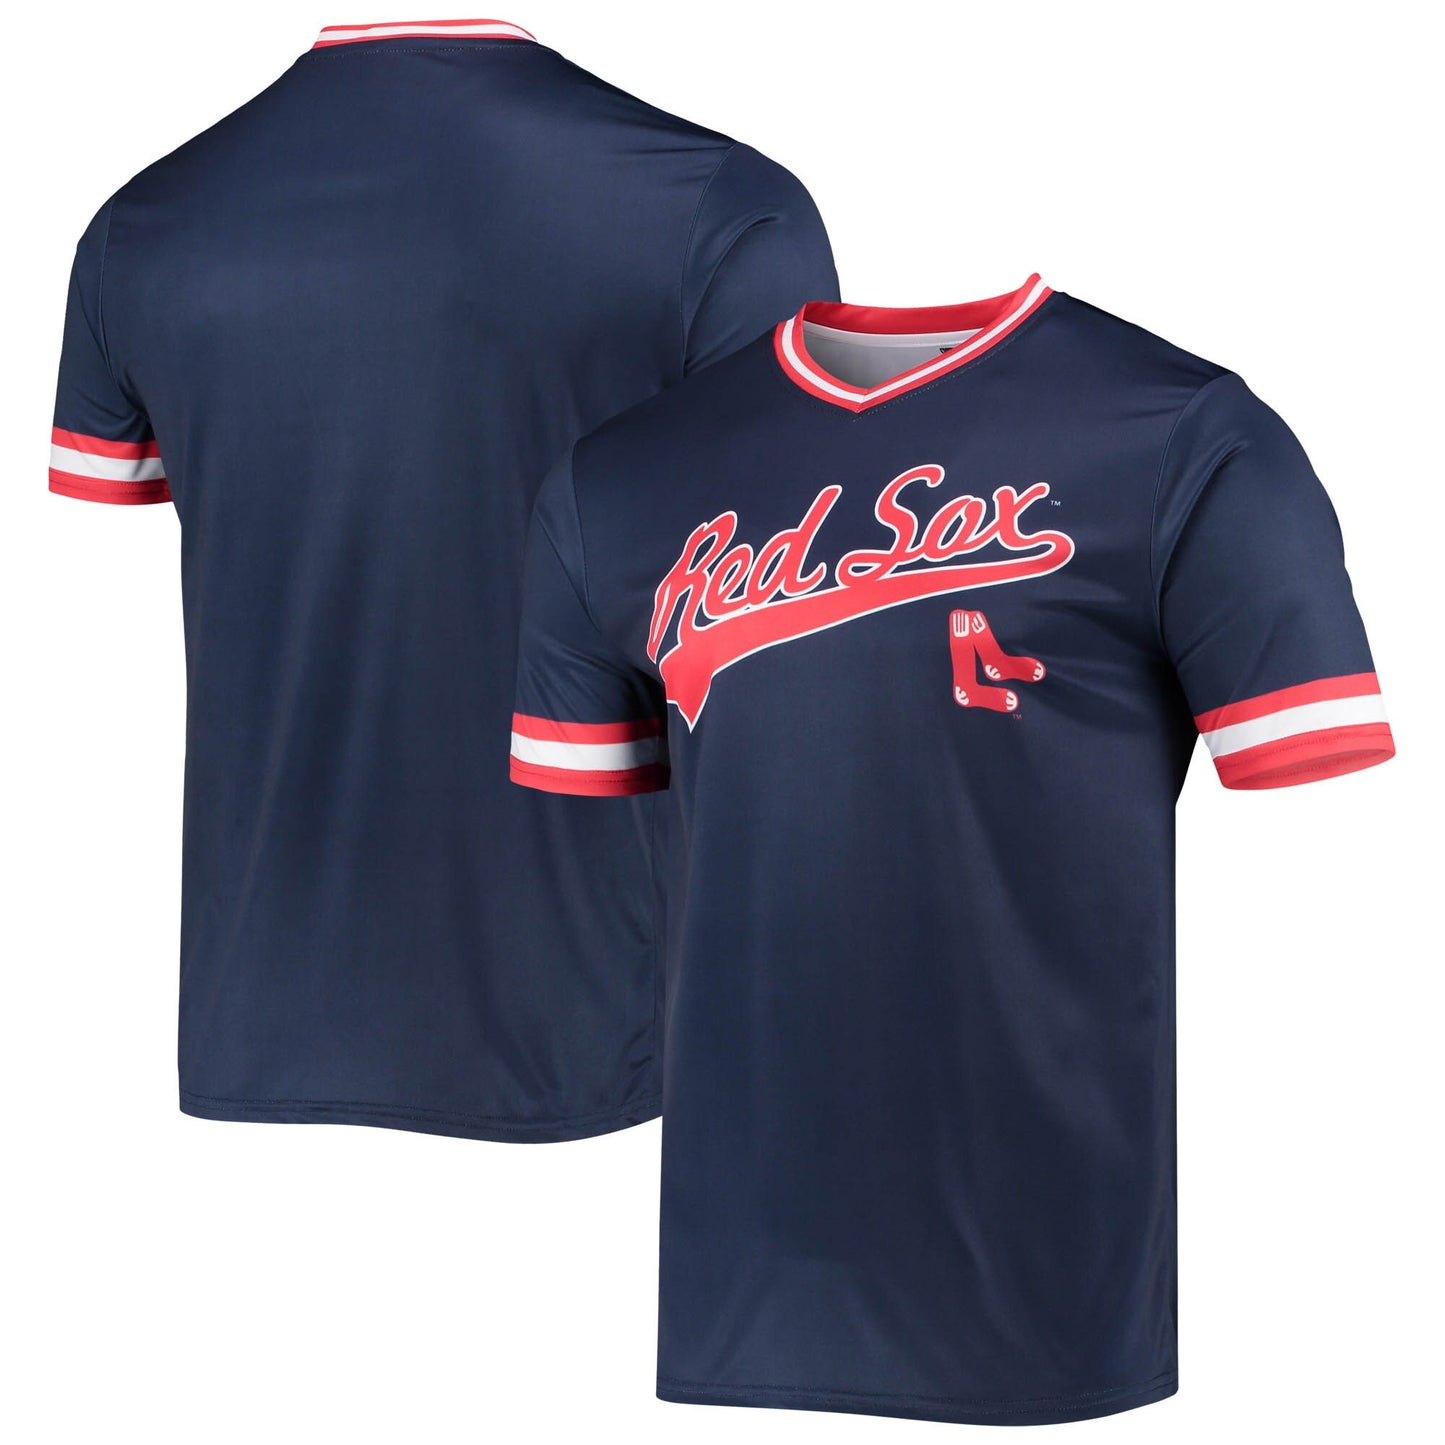 Boston Red Sox Stitches Cooperstown Collection V-Neck Team Color Jersey - Navy/Red